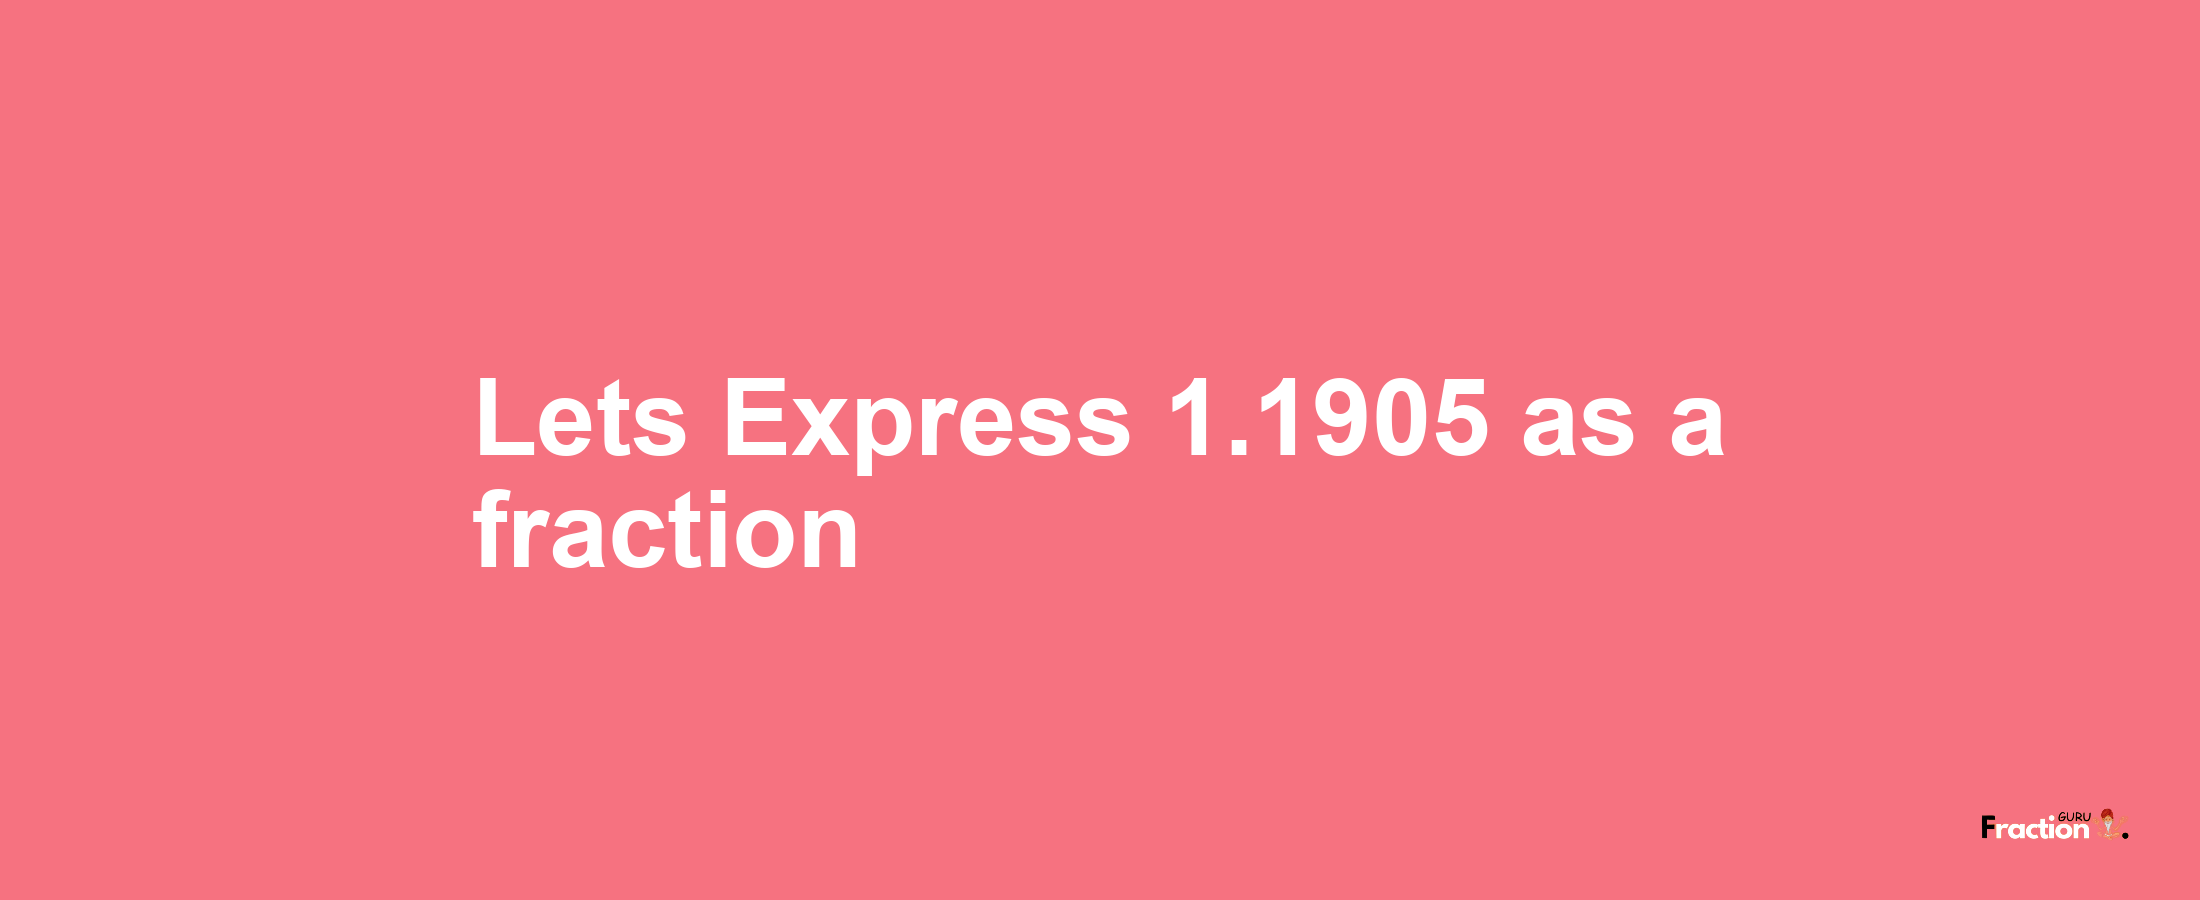 Lets Express 1.1905 as afraction